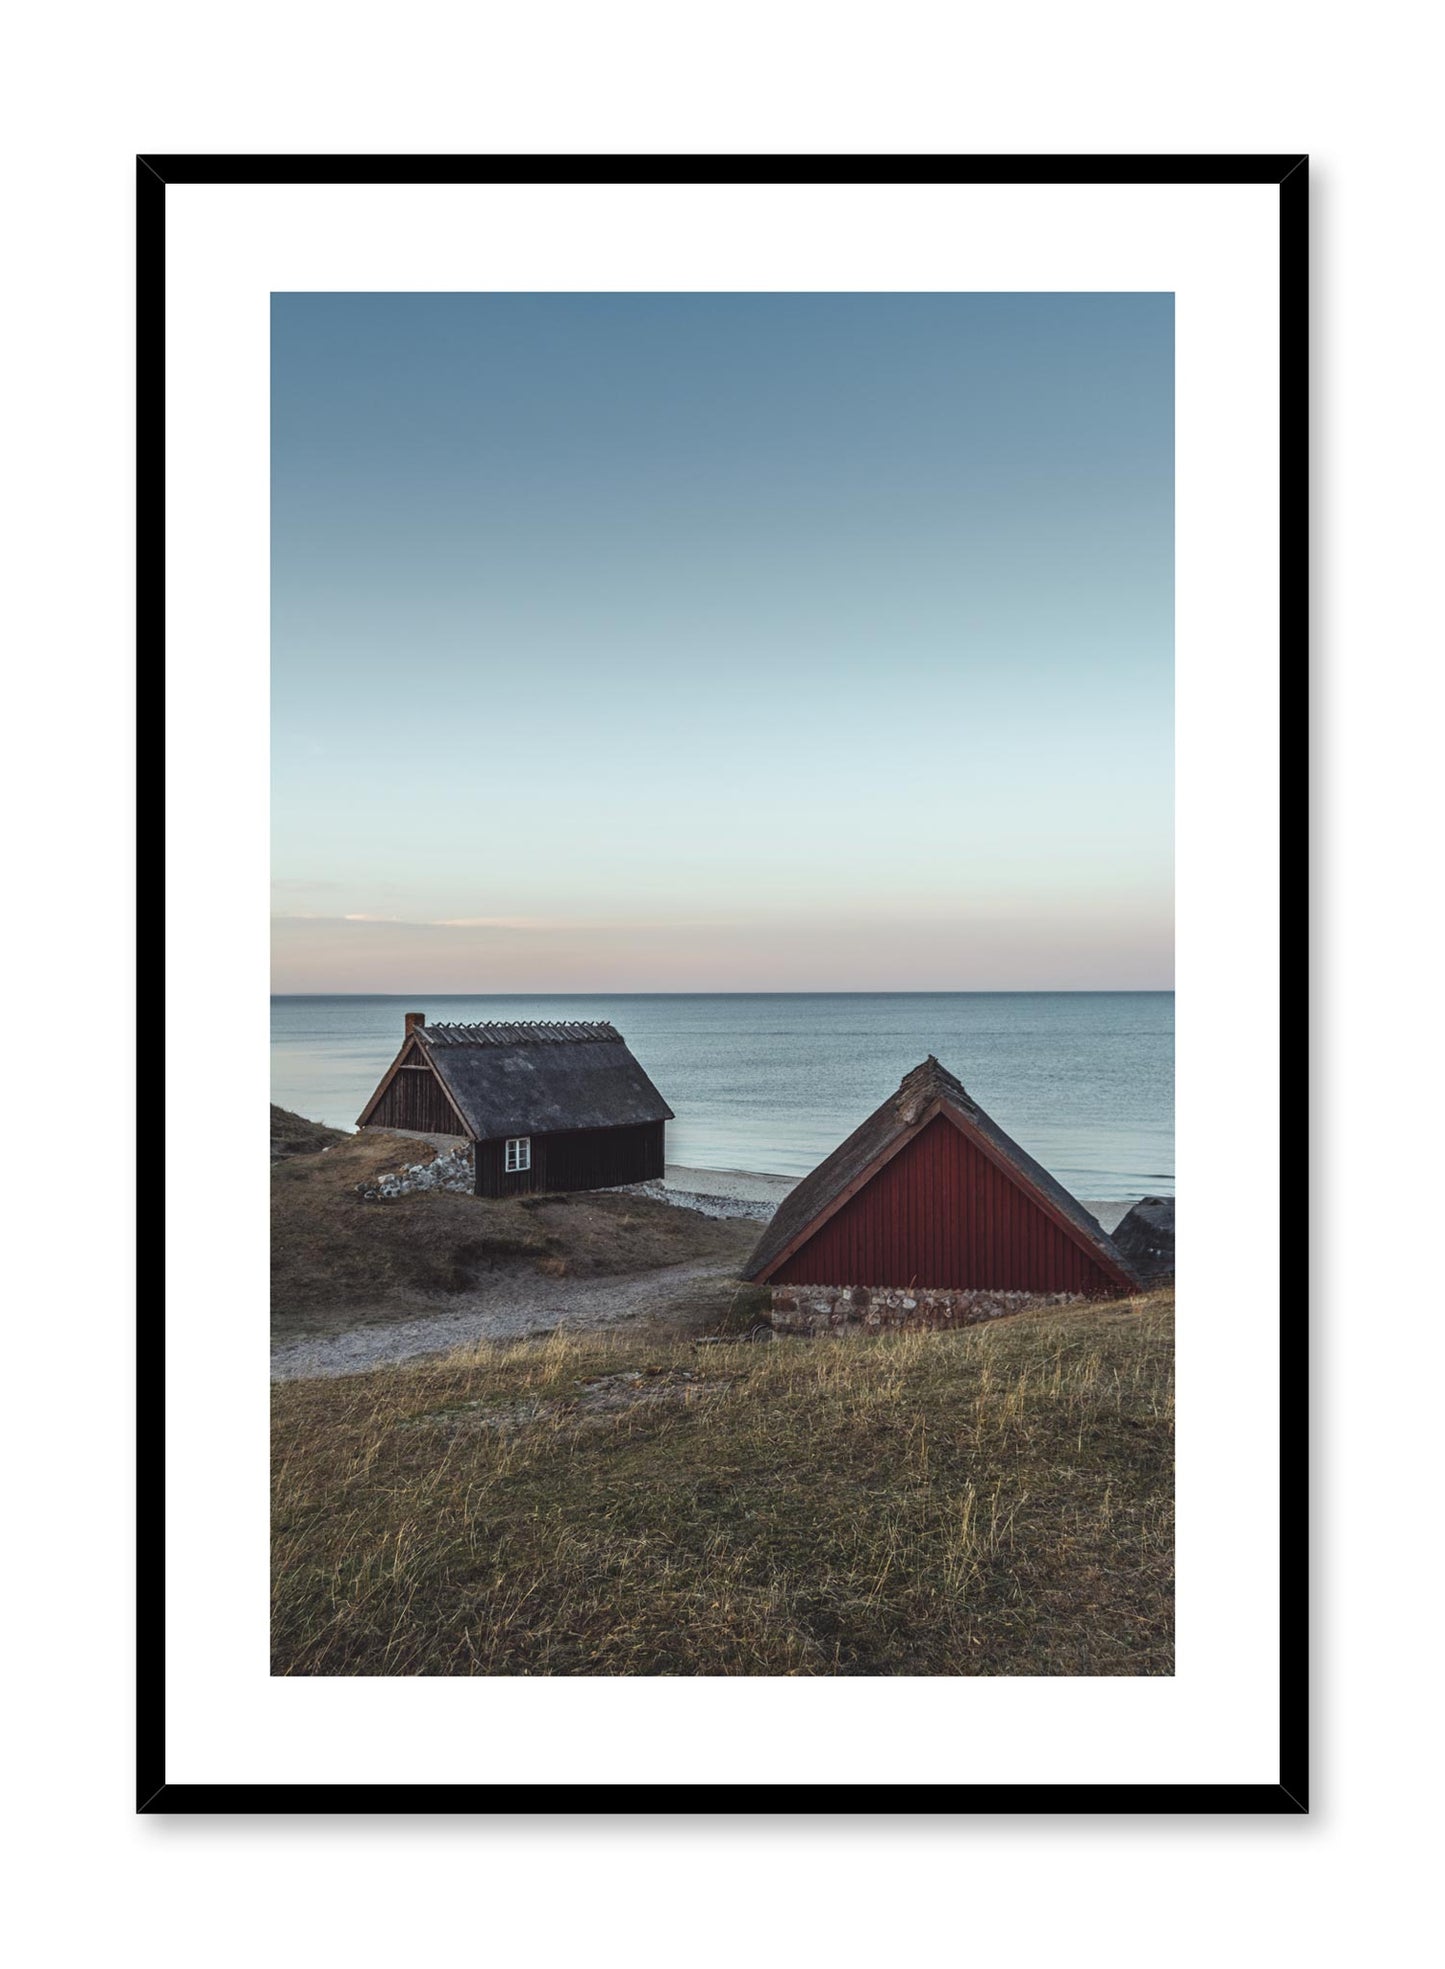 Minimalist design poster by Opposite Wall with seaside town photography